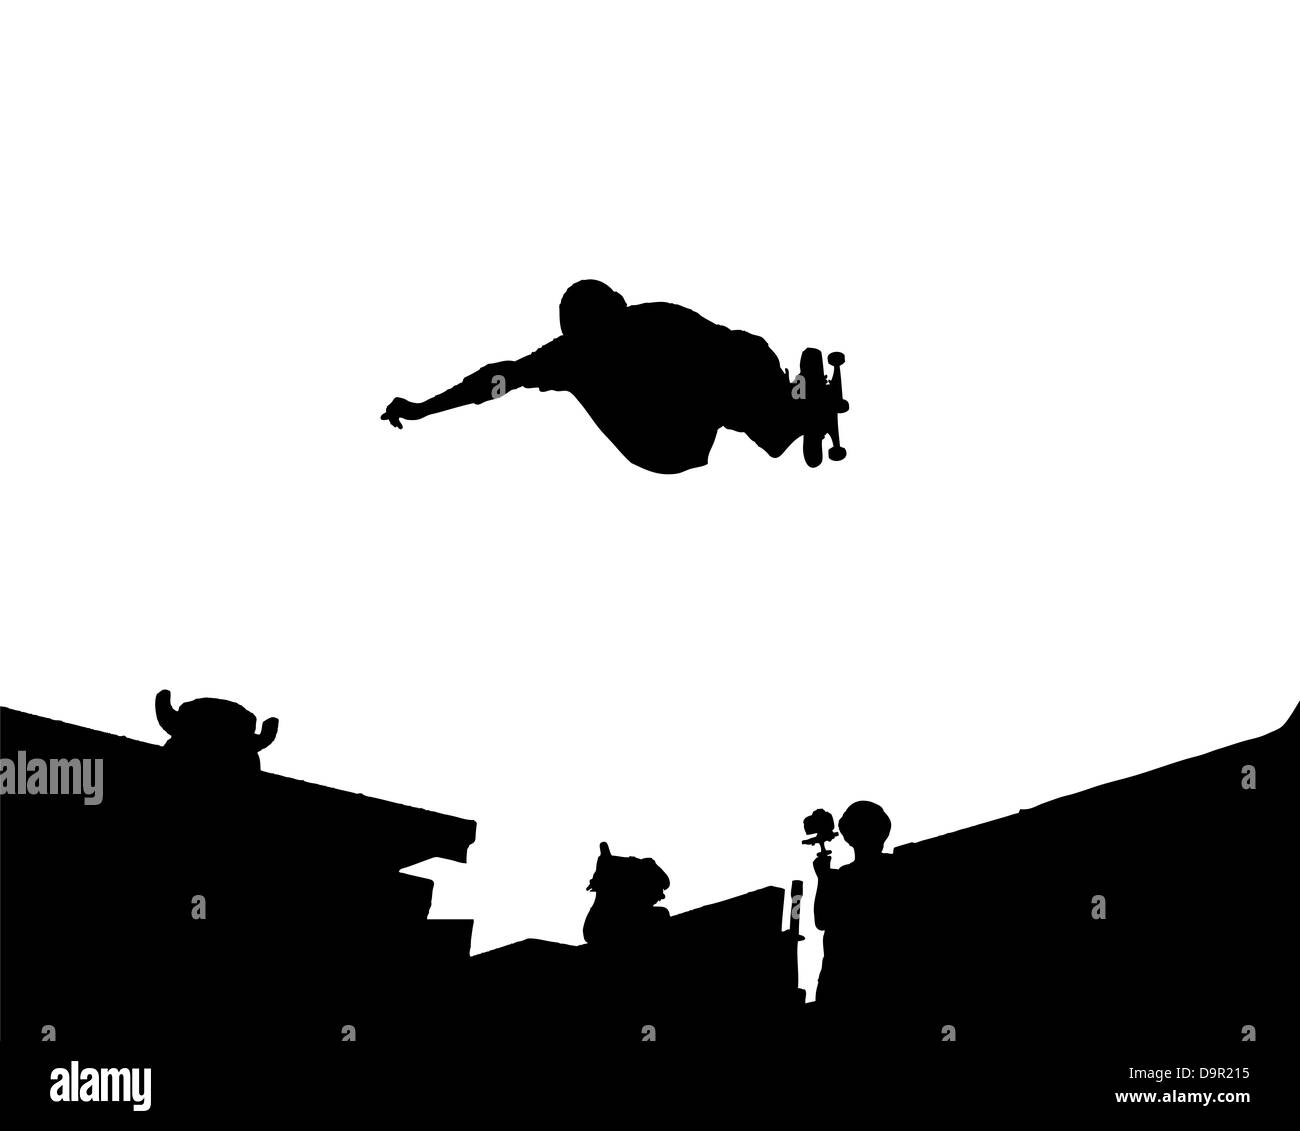 Silhouette Vector of skateboarding doing a indy frontside air Stock Photo